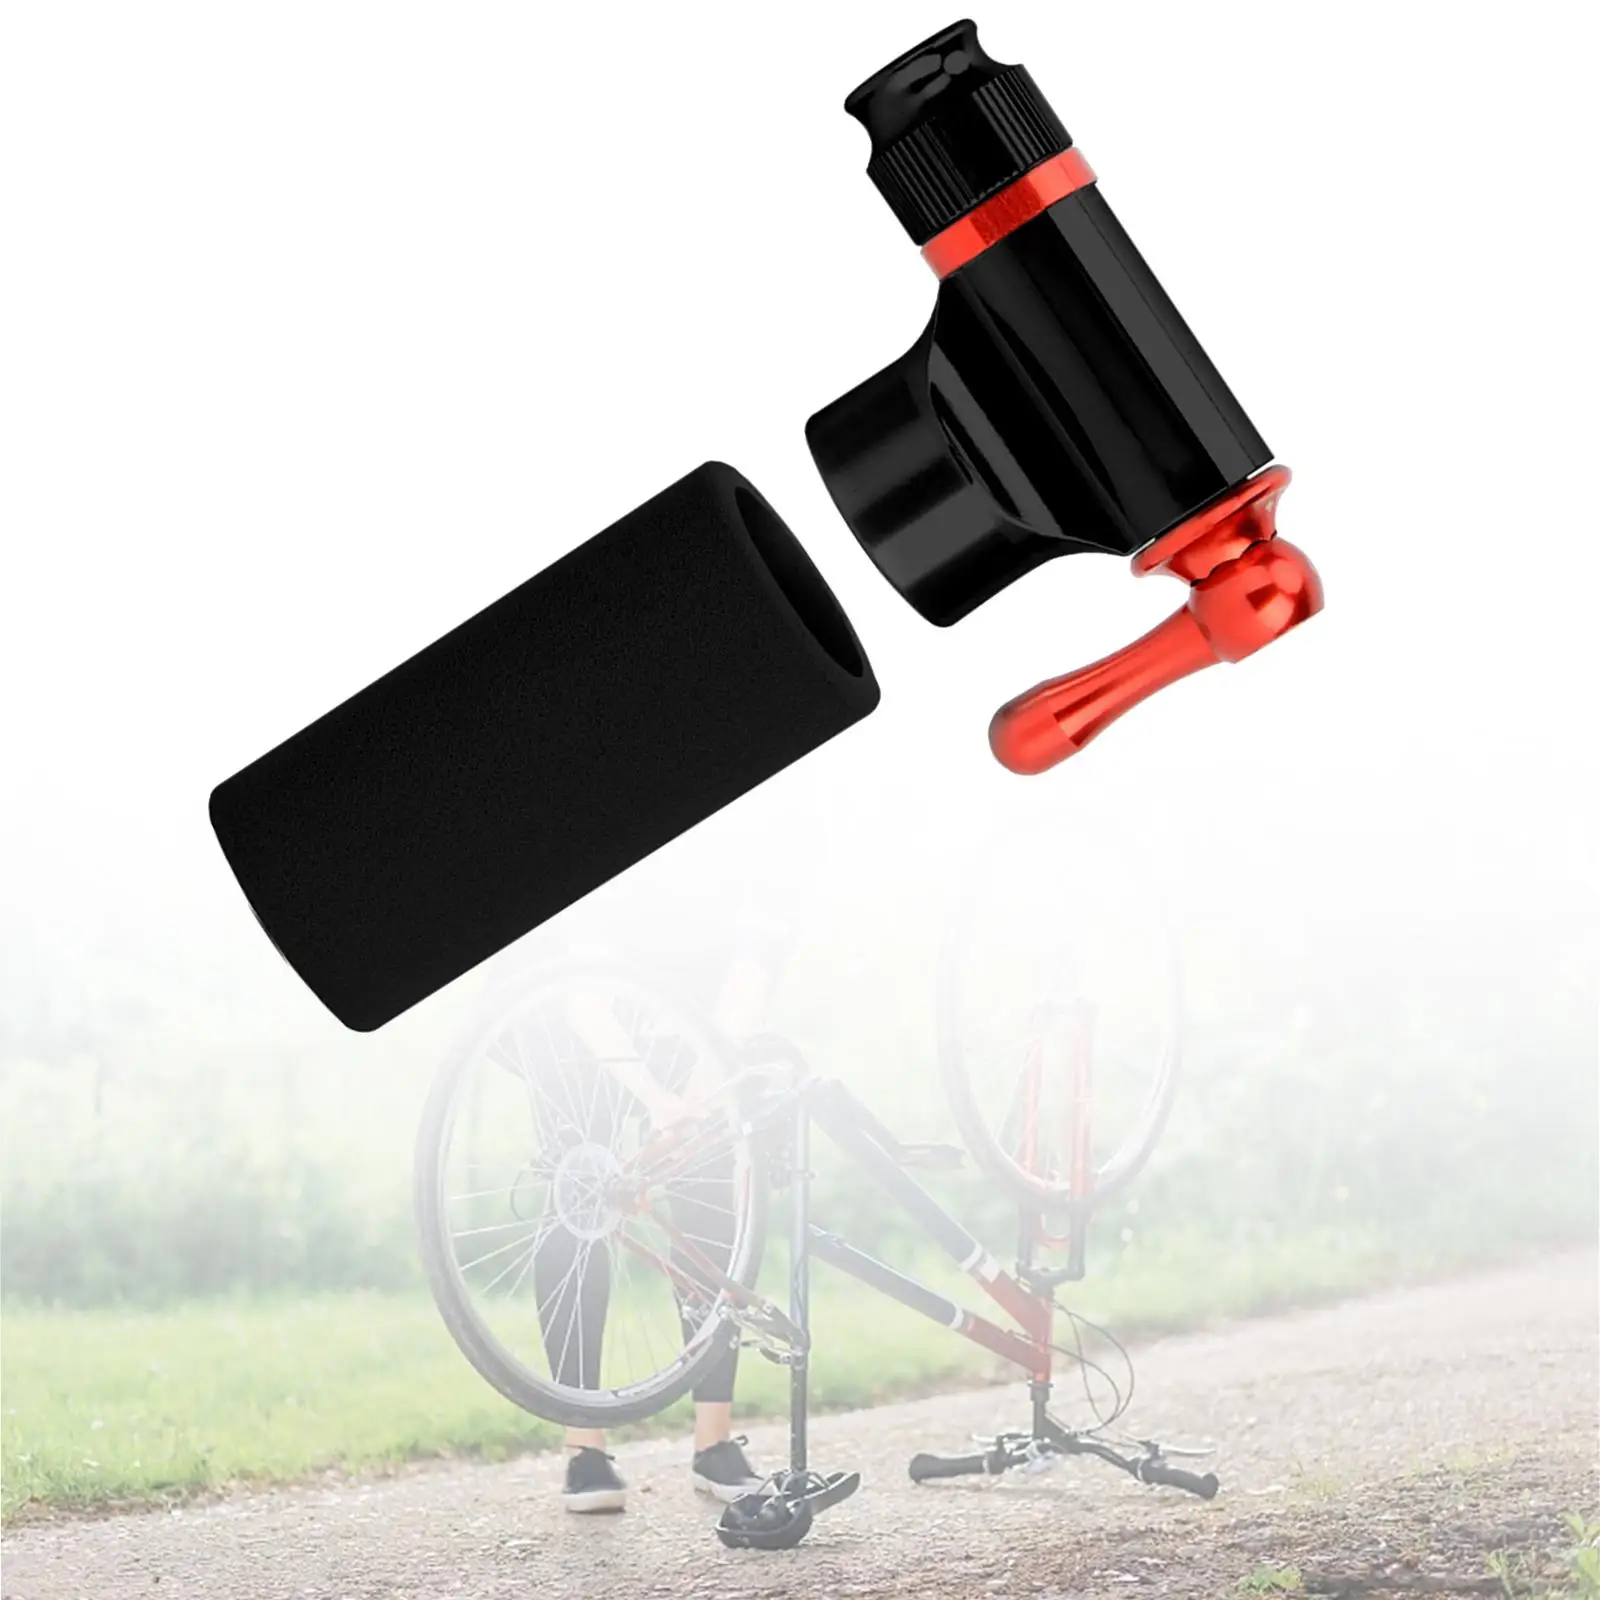 CO2 Bike Tire Inflator Portable Portable Compact Accs Inflator Connector for Sports Basketball Mountain Bike Traveling Camping